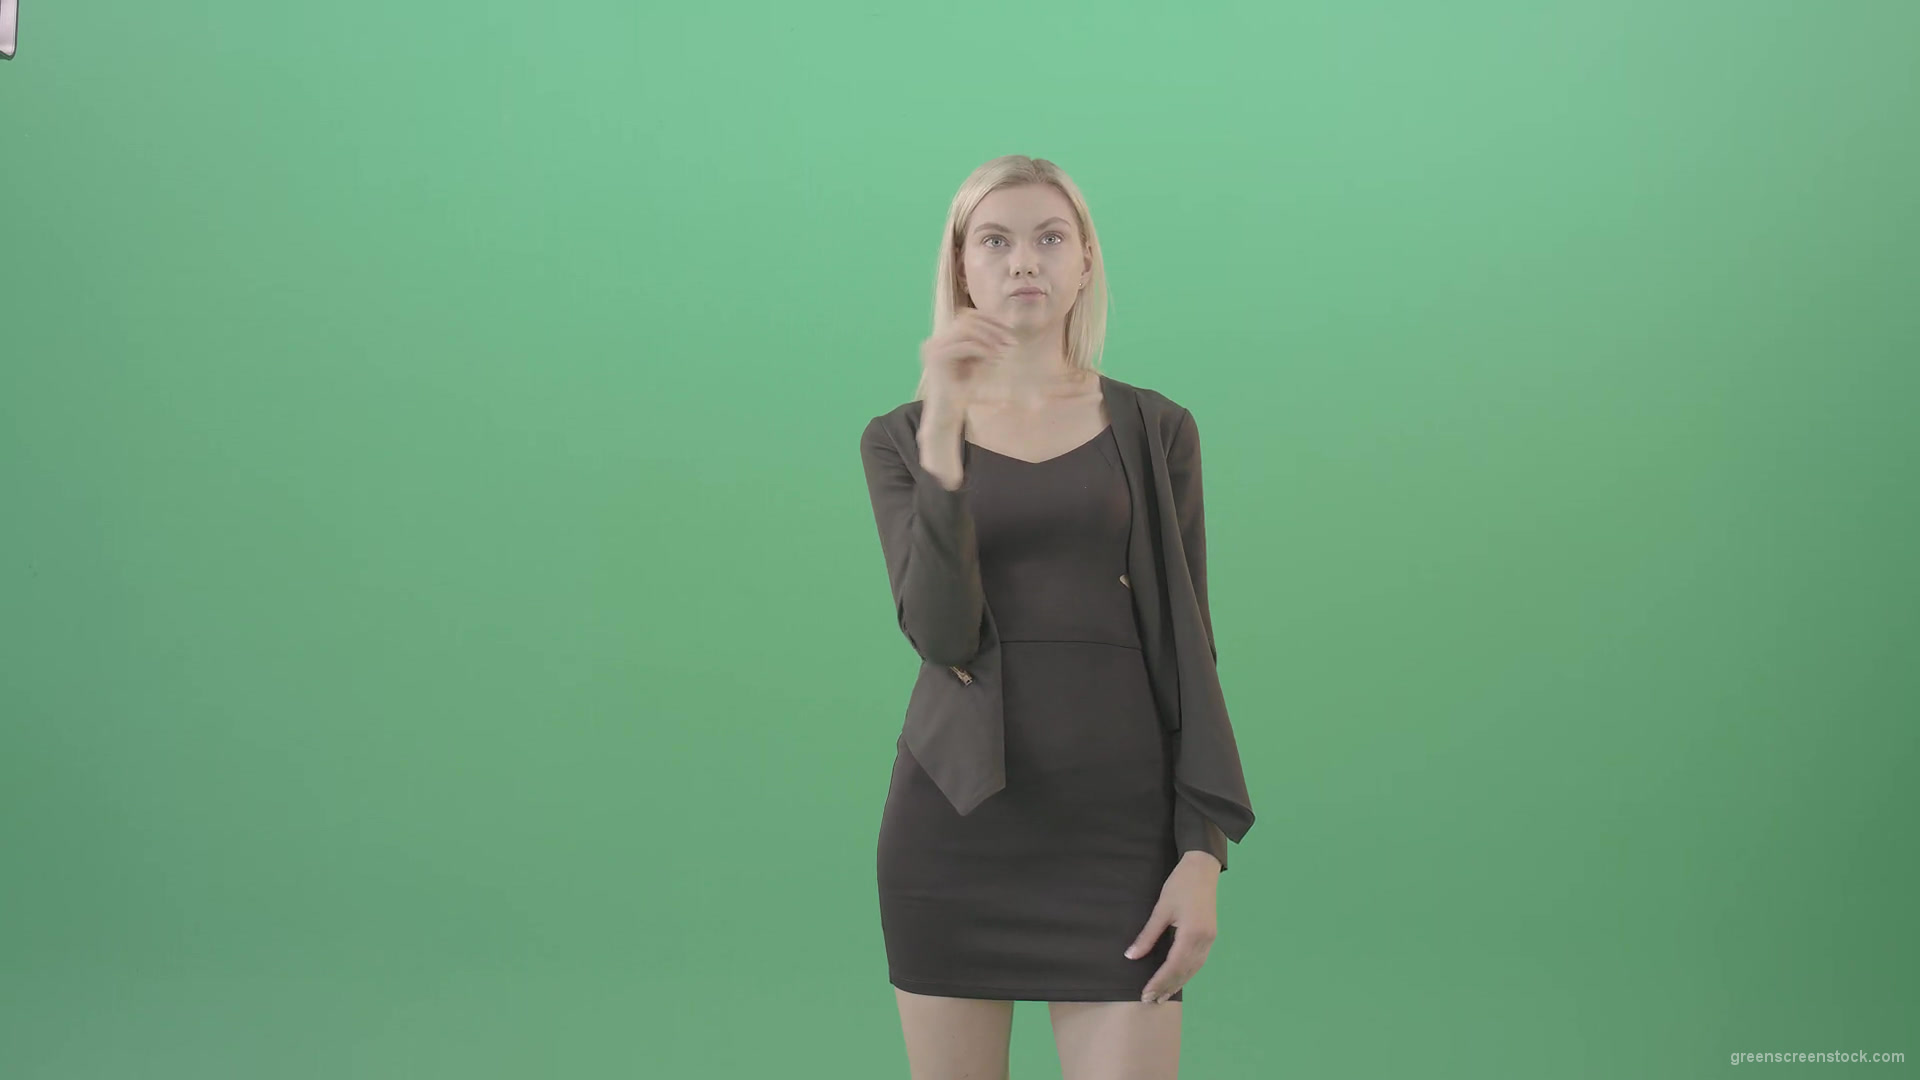 Girl-searching-in-internet-virtual-shopping-on-touch-screen-on-green-background-4K-Video-Footage-1920_006 Green Screen Stock